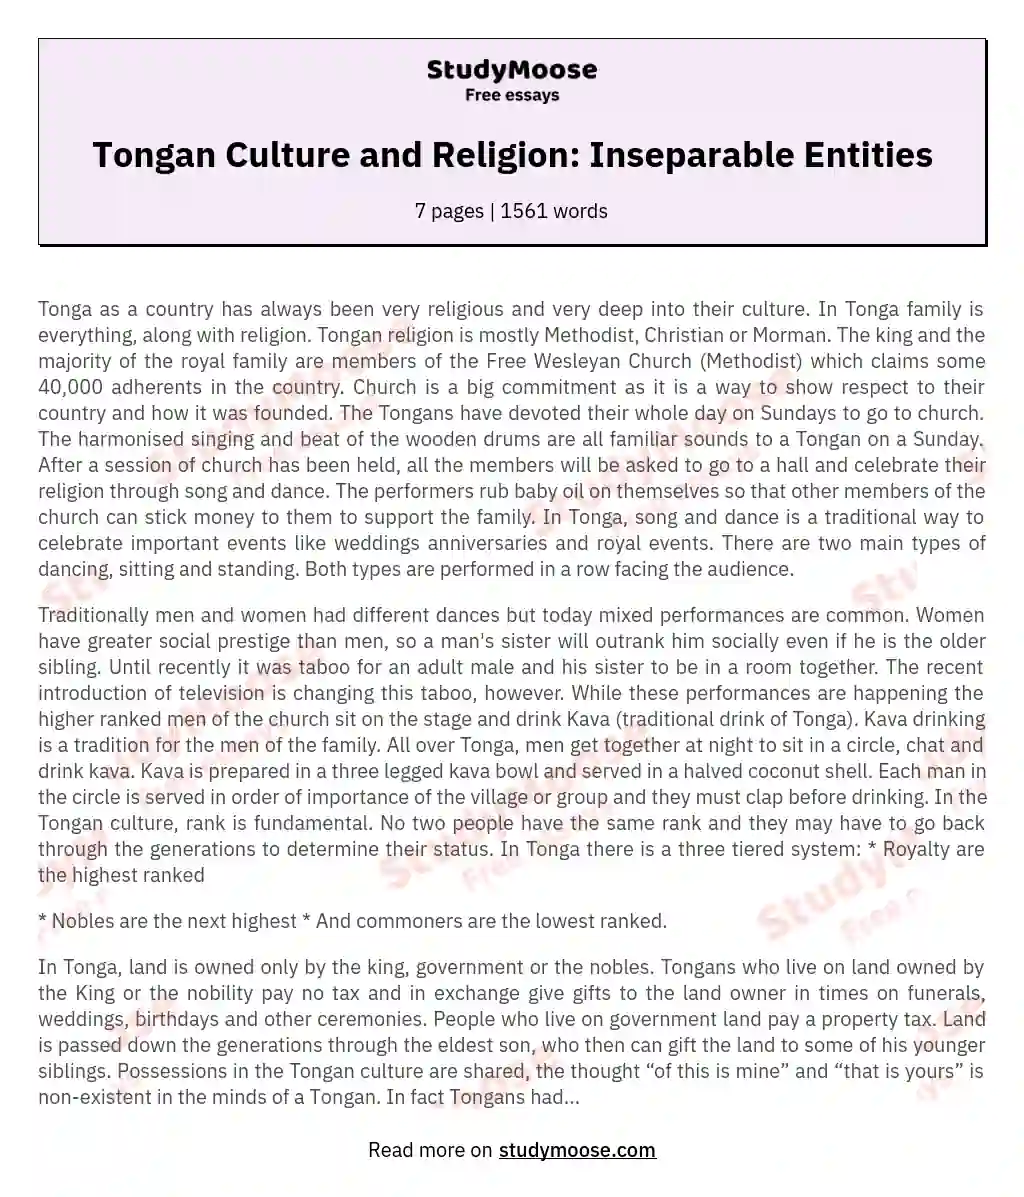 Tongan Culture and Religion: Inseparable Entities essay